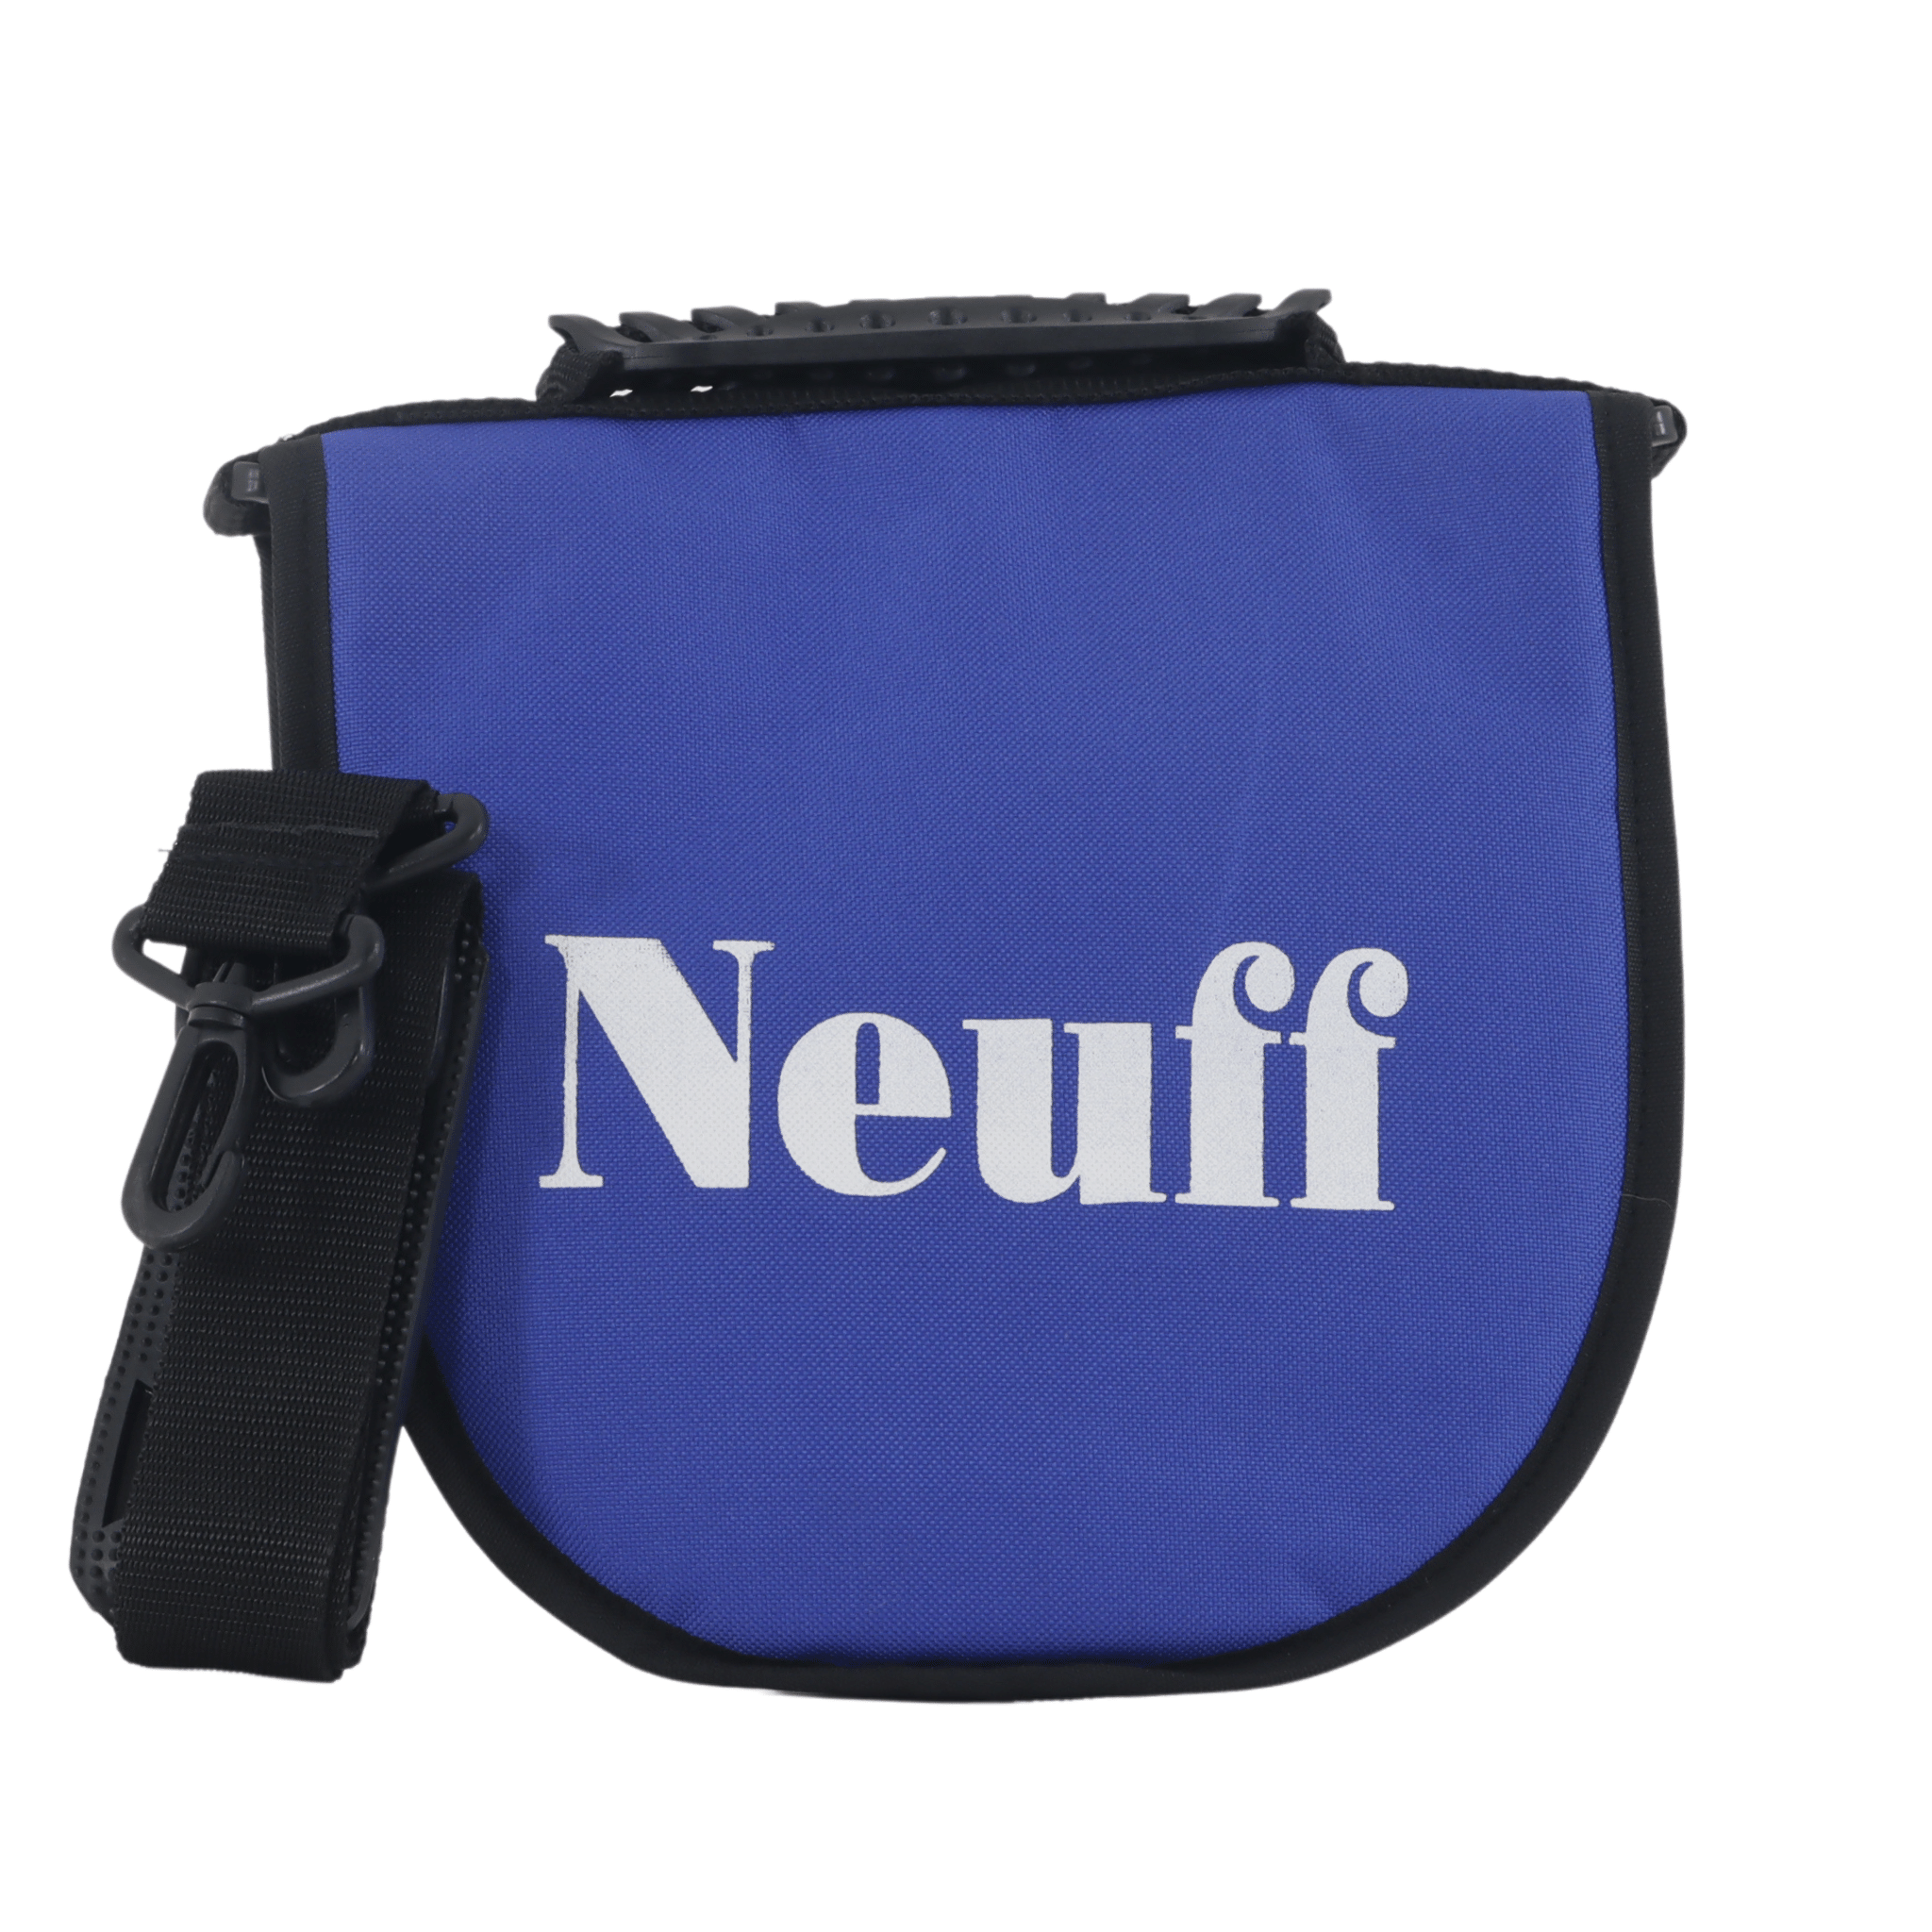 Double discus bag with strap padded